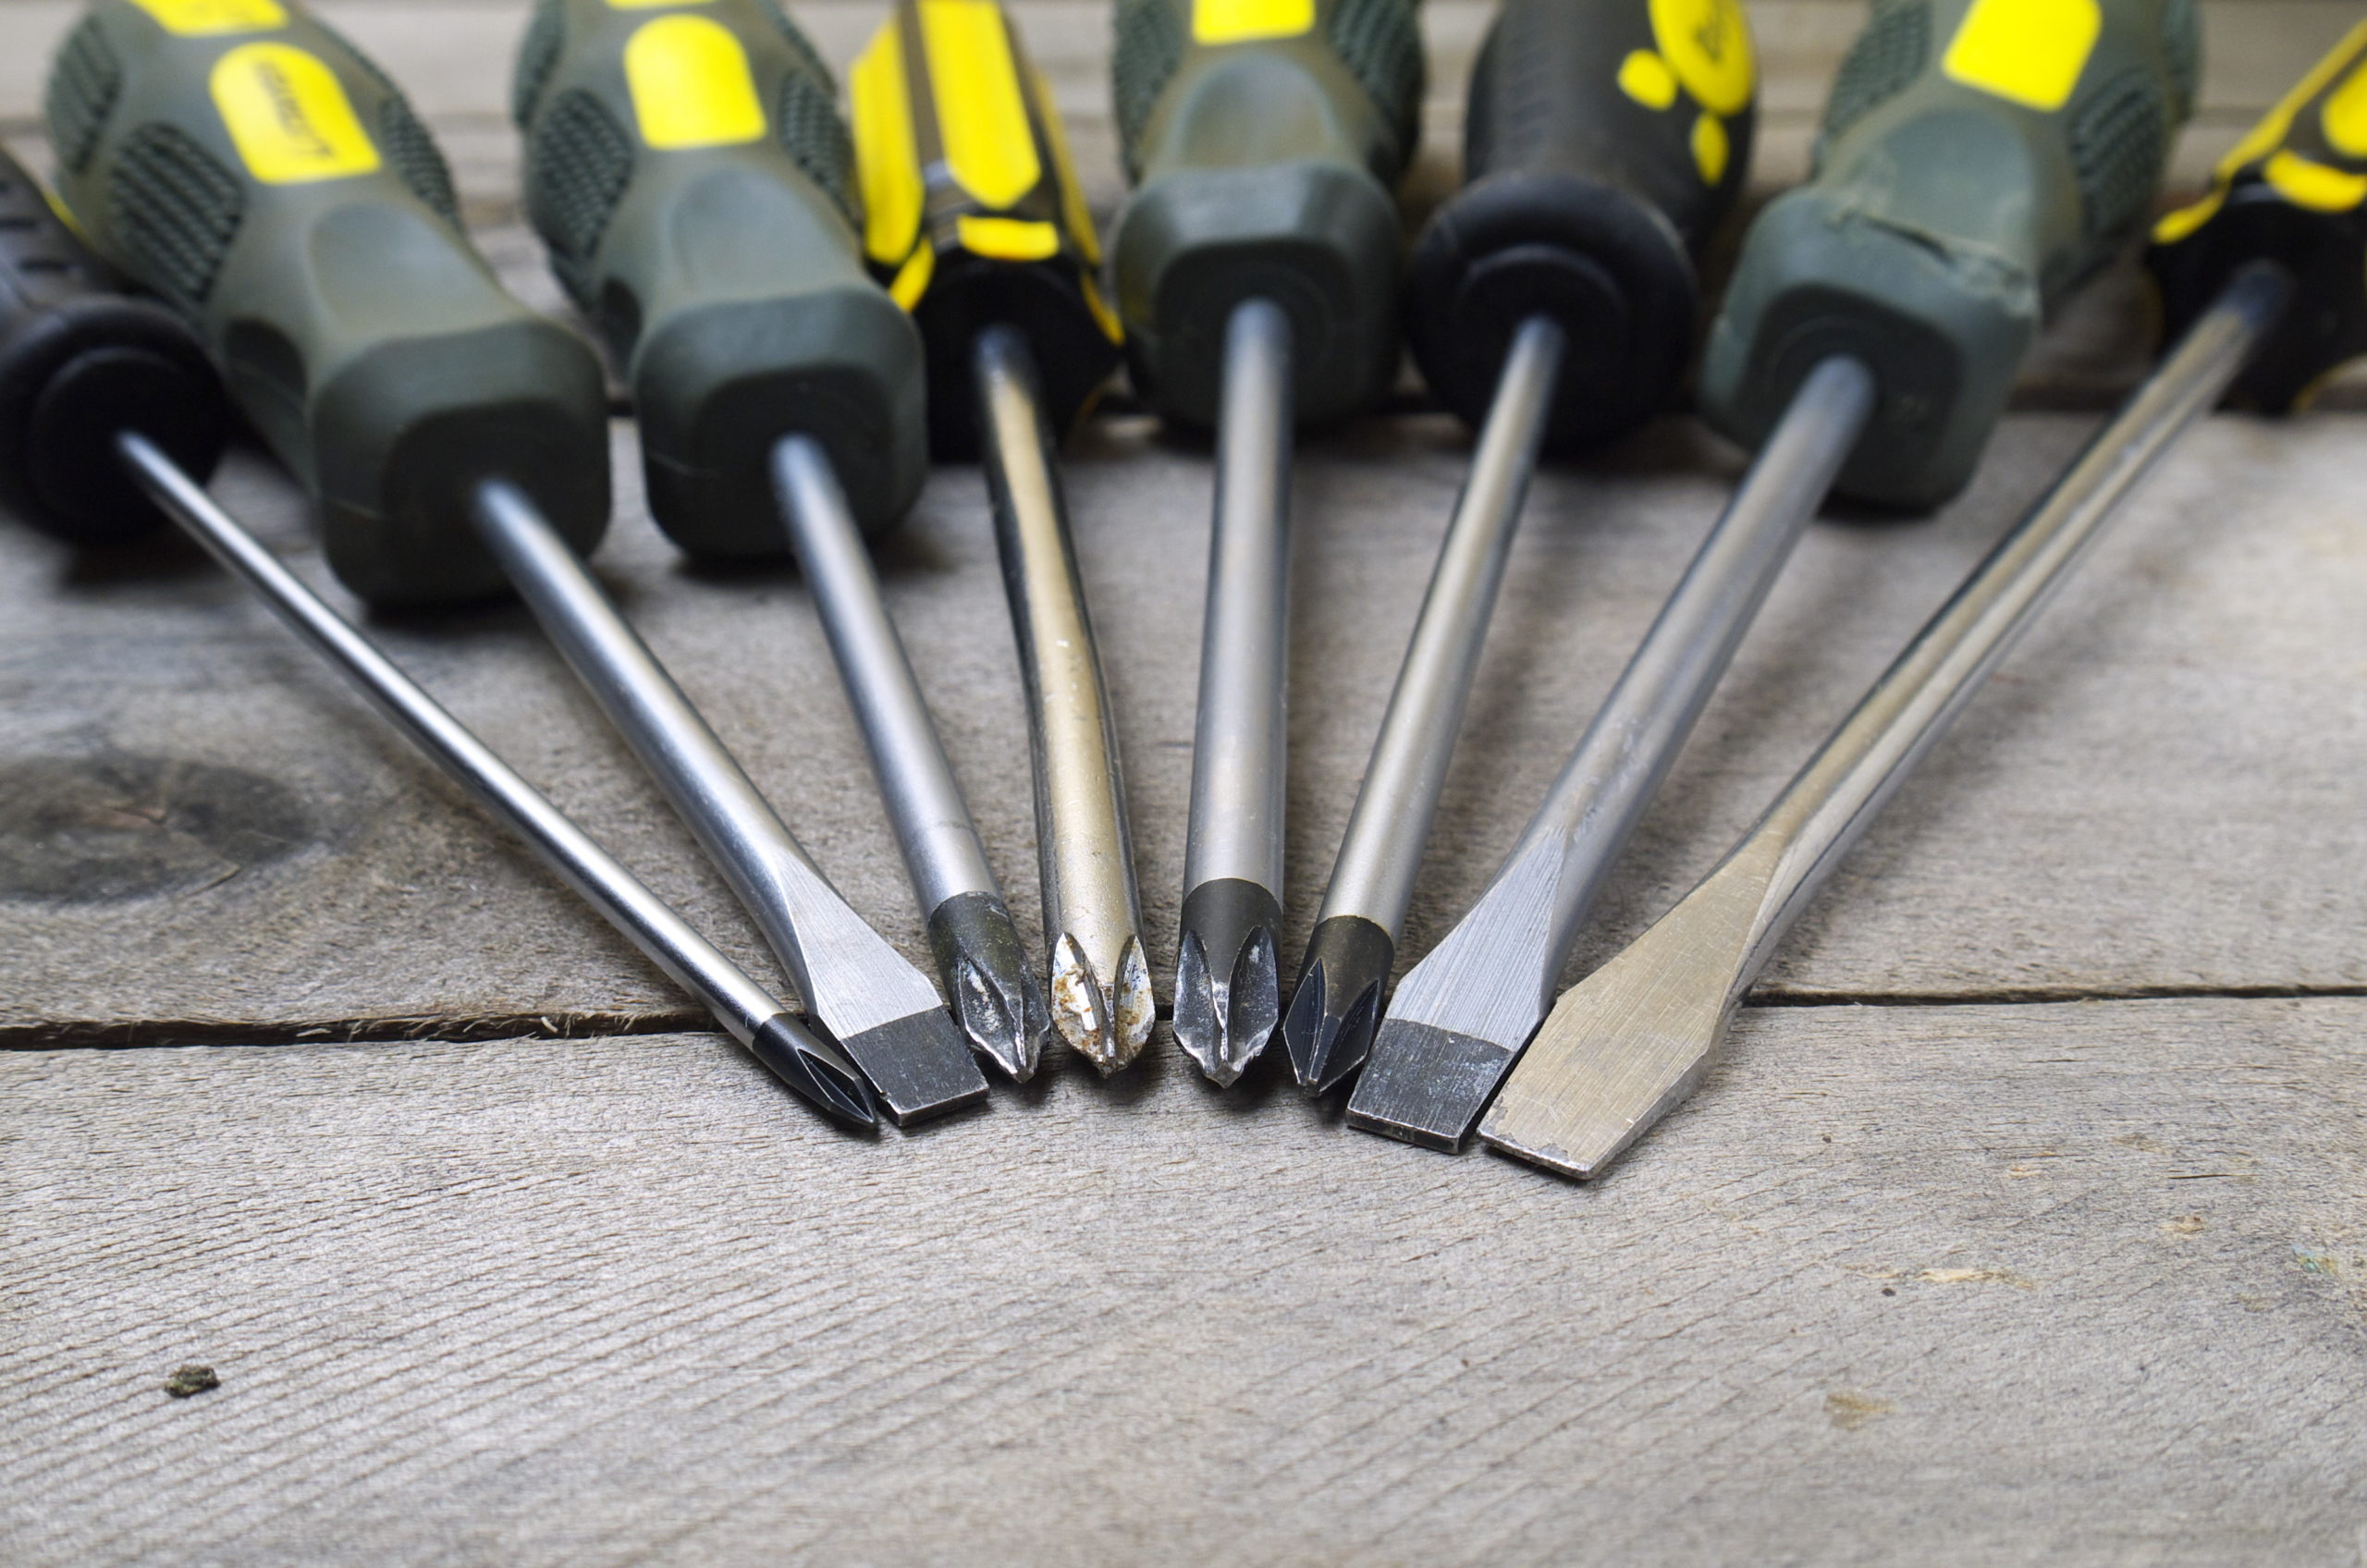 Screwdriver Types Everyone Should Have in Their Toolbox